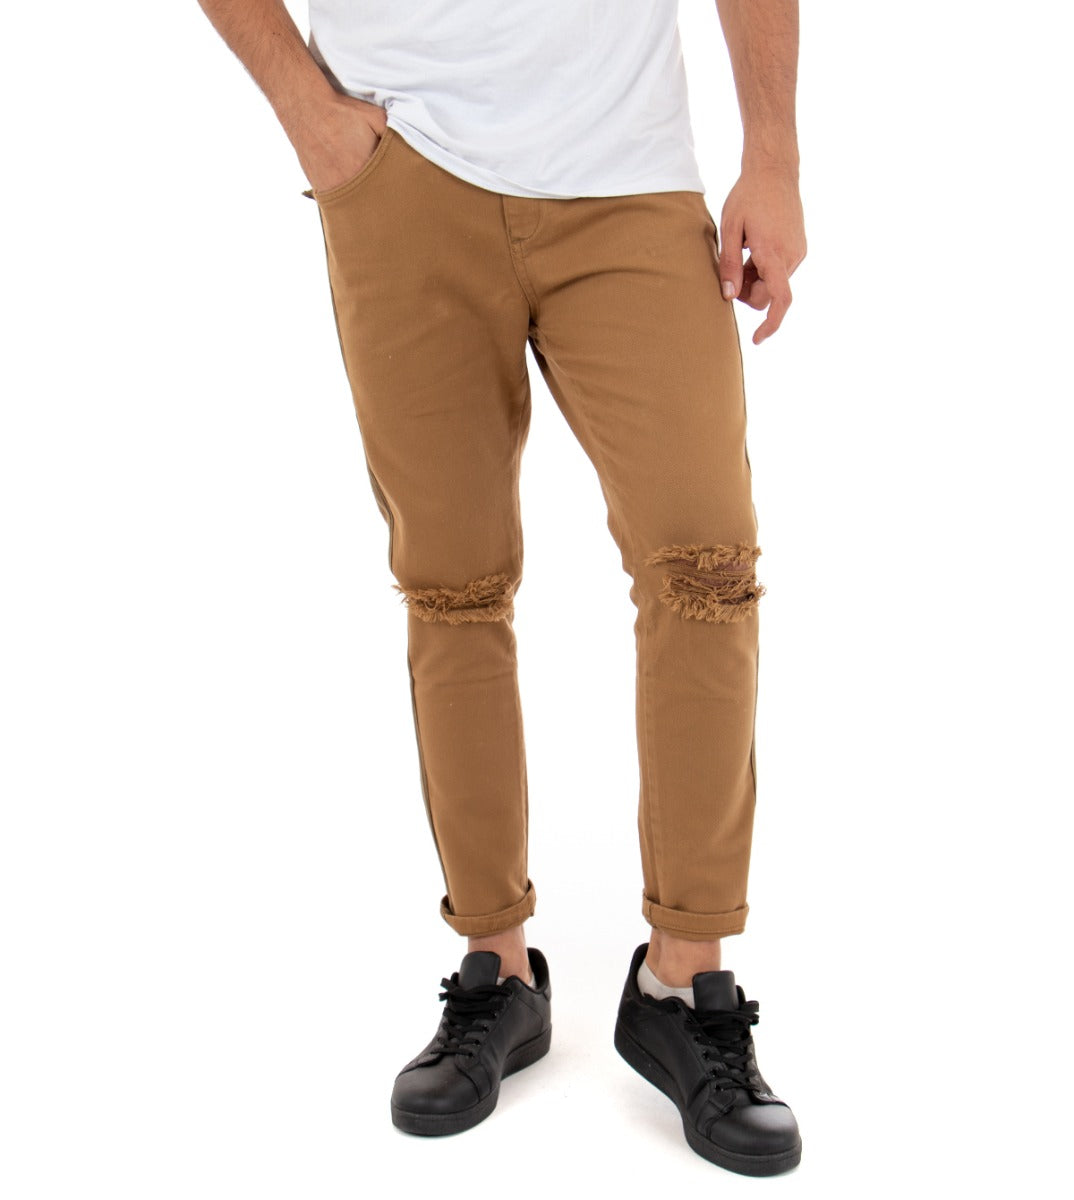 Slim Fit Men's Knee-Length Jeans Pants Camel Casual GIOSAL-P3321A